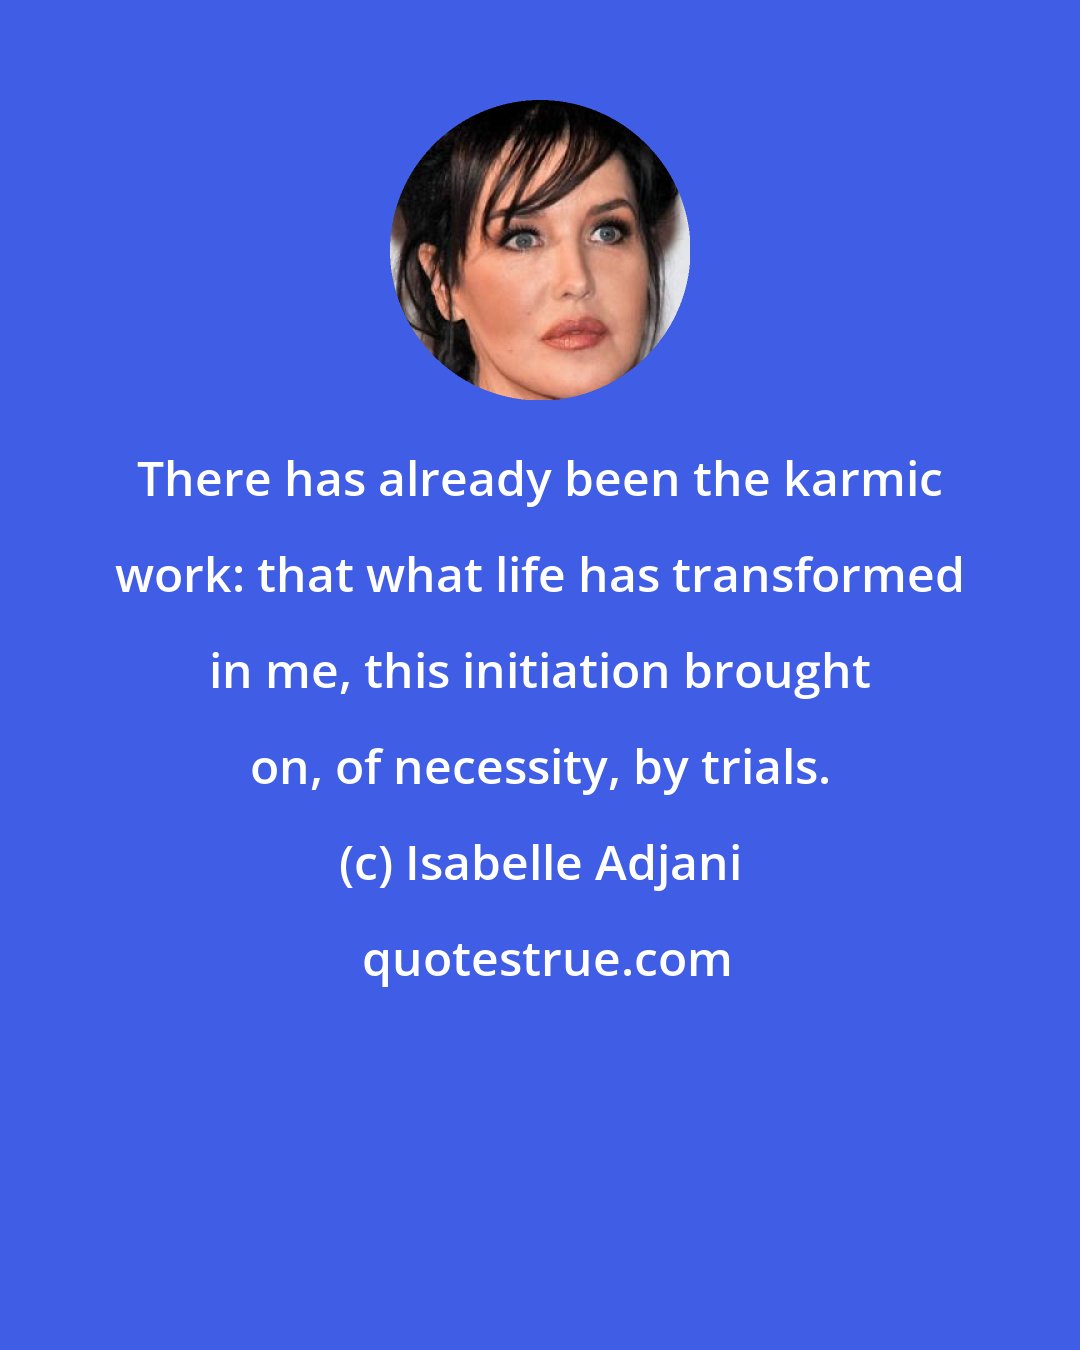 Isabelle Adjani: There has already been the karmic work: that what life has transformed in me, this initiation brought on, of necessity, by trials.